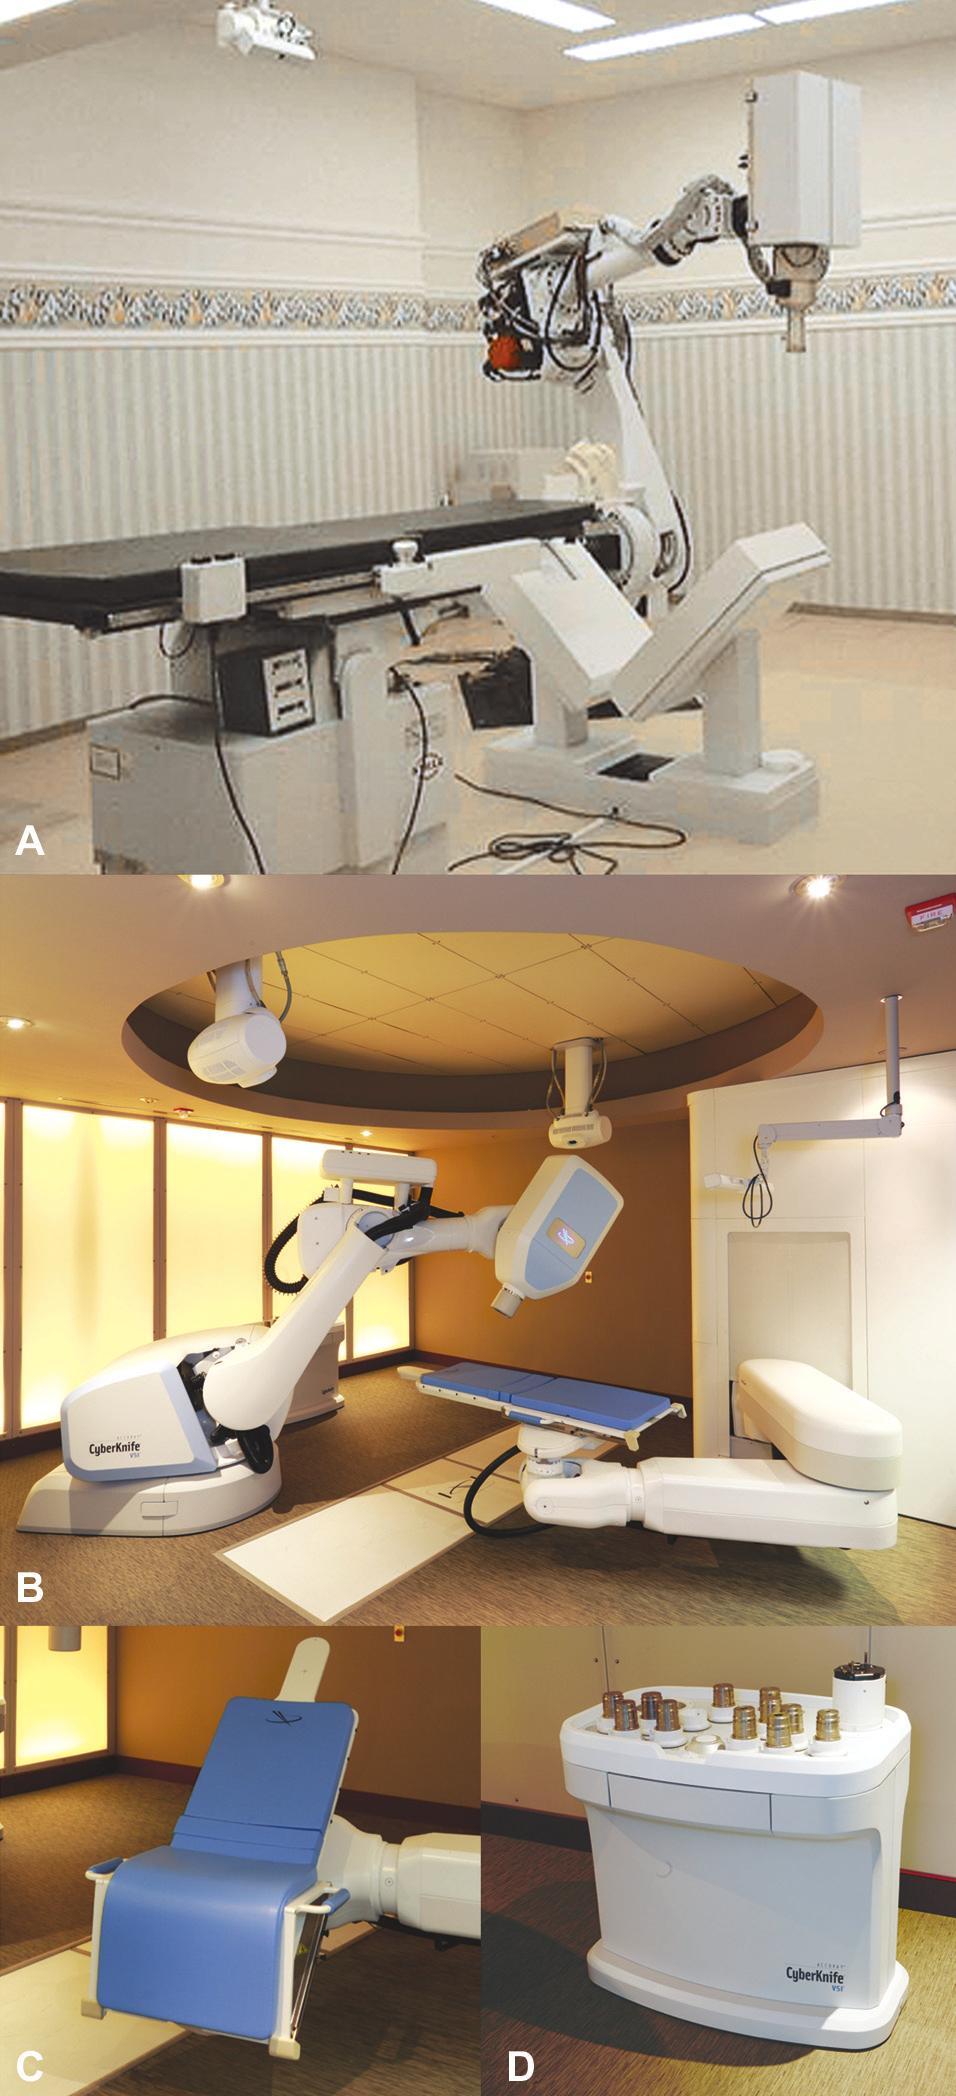 The CyberKnife System in 2010 435 ability of the robotic manipulator to direct each beam at a unique point within the patient, without any need to reposition the patient between beams, by generating